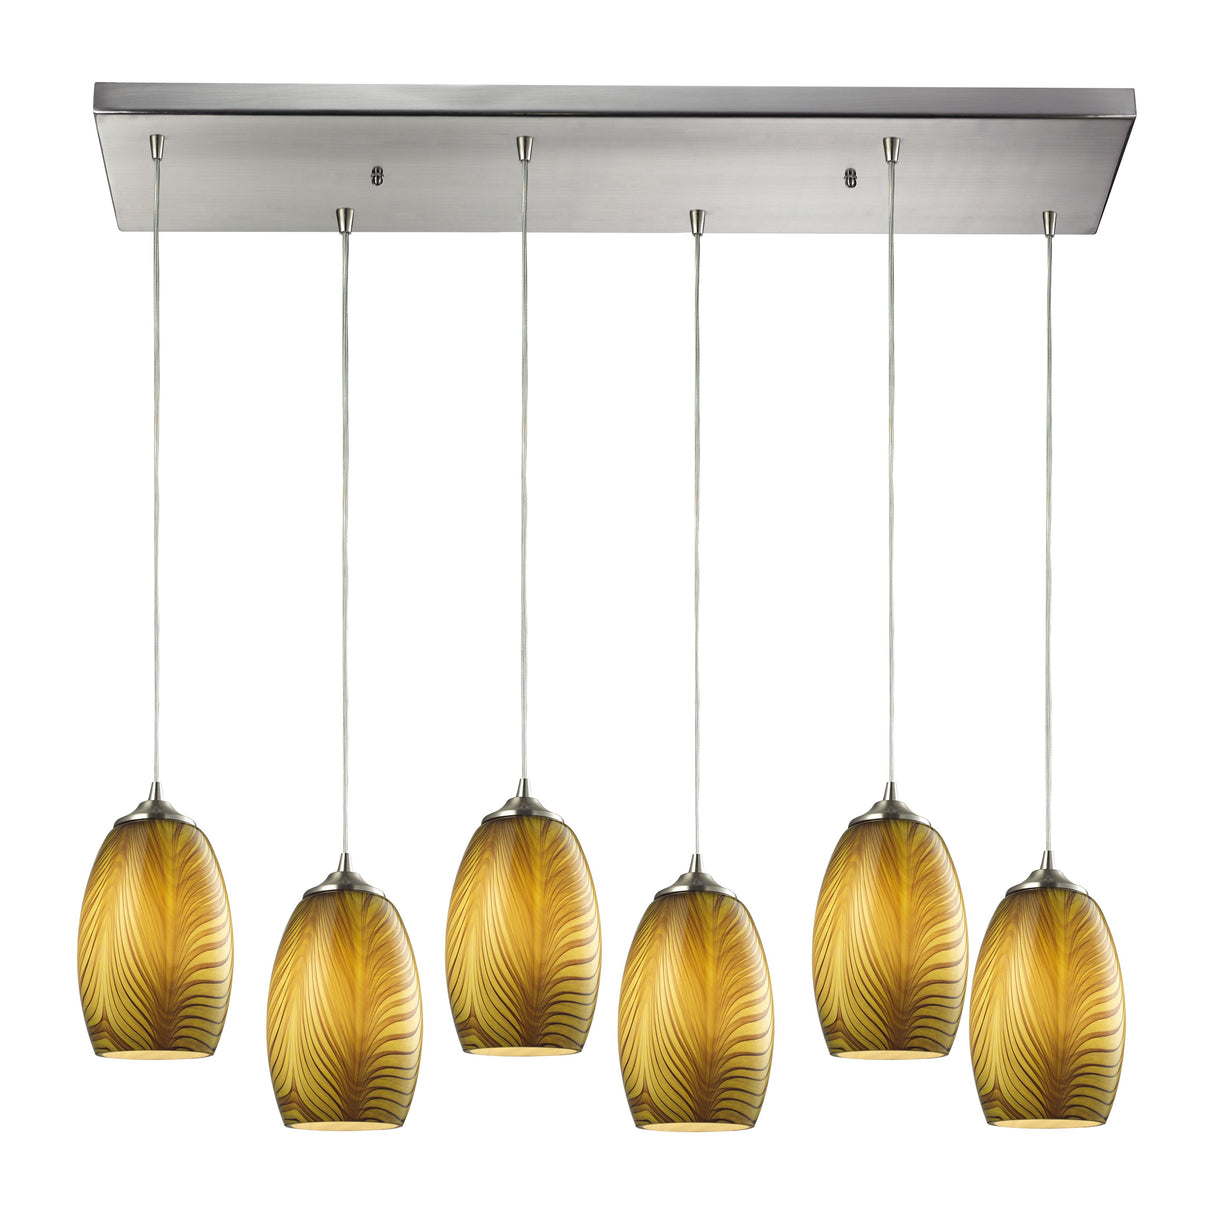 Elk 31630/6RC Tidewaters 30'' Wide 6-Light Pendant - Satin Nickel with Amber Glass